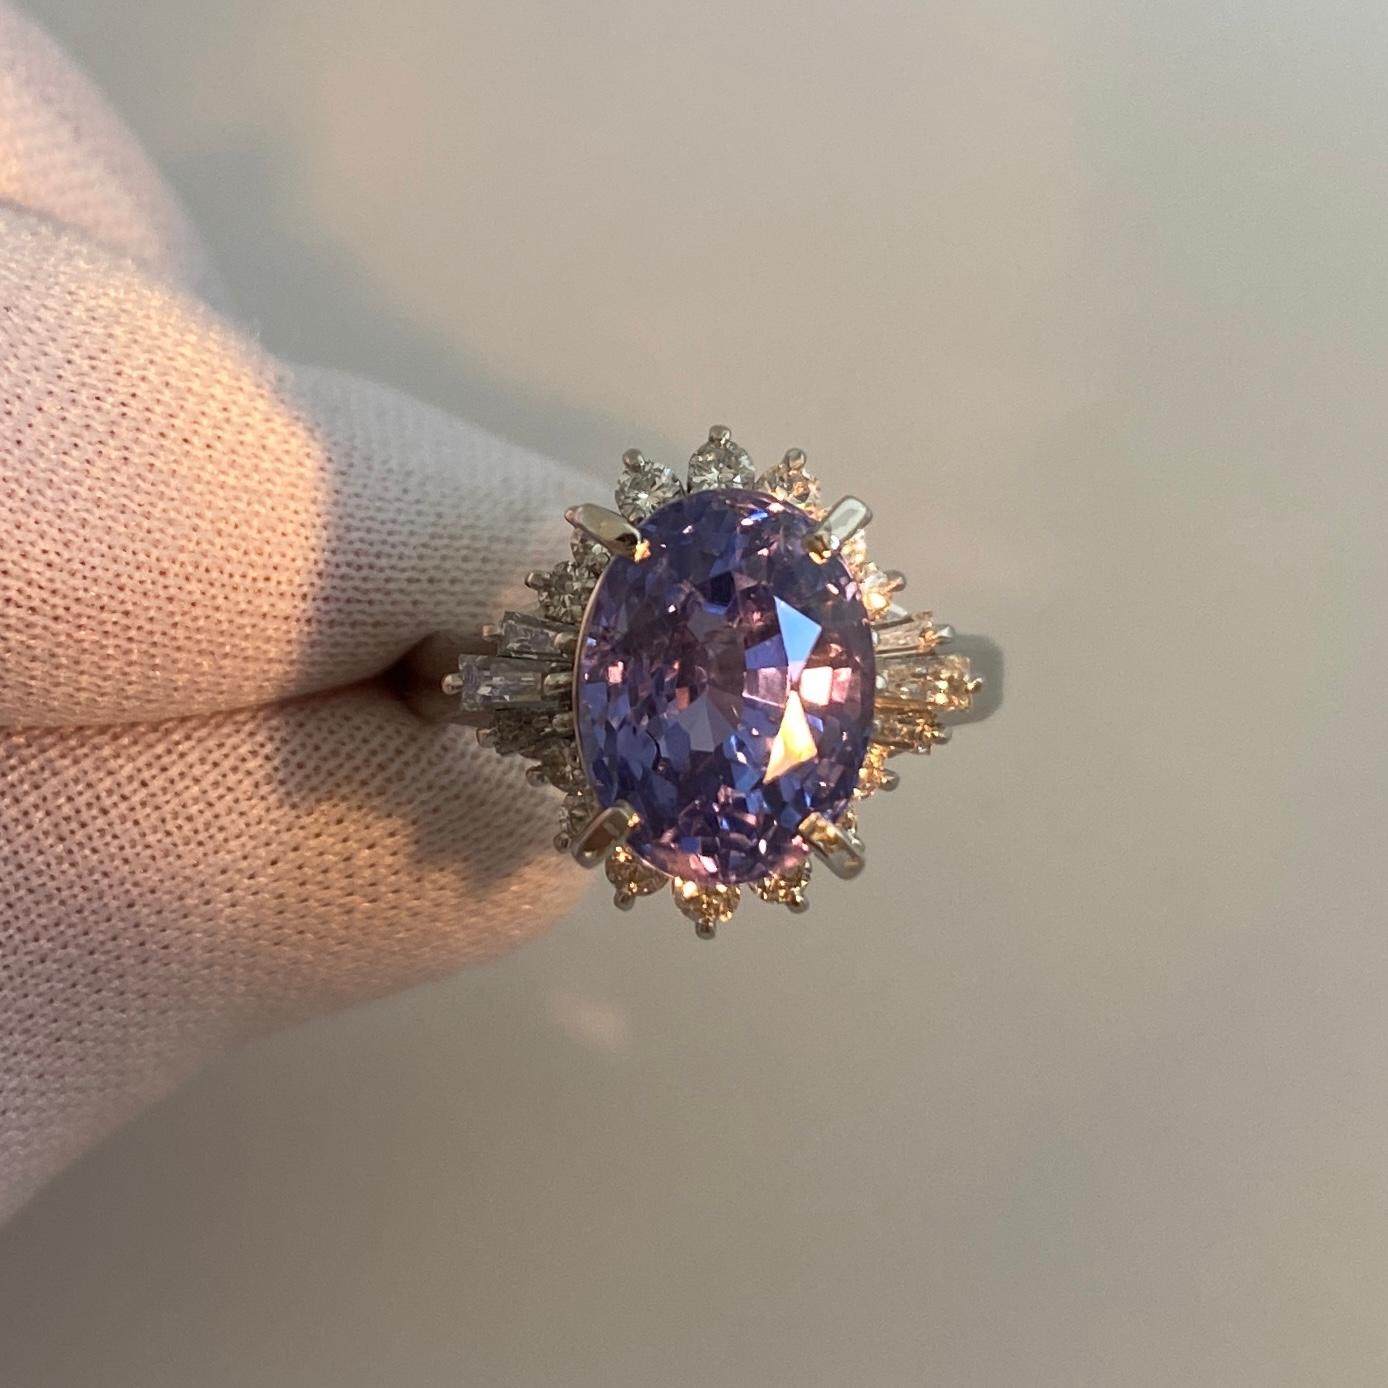 GIA Certified 7.08 Carat Untreated Color Change Sapphire & Diamond Cocktail Ring 5